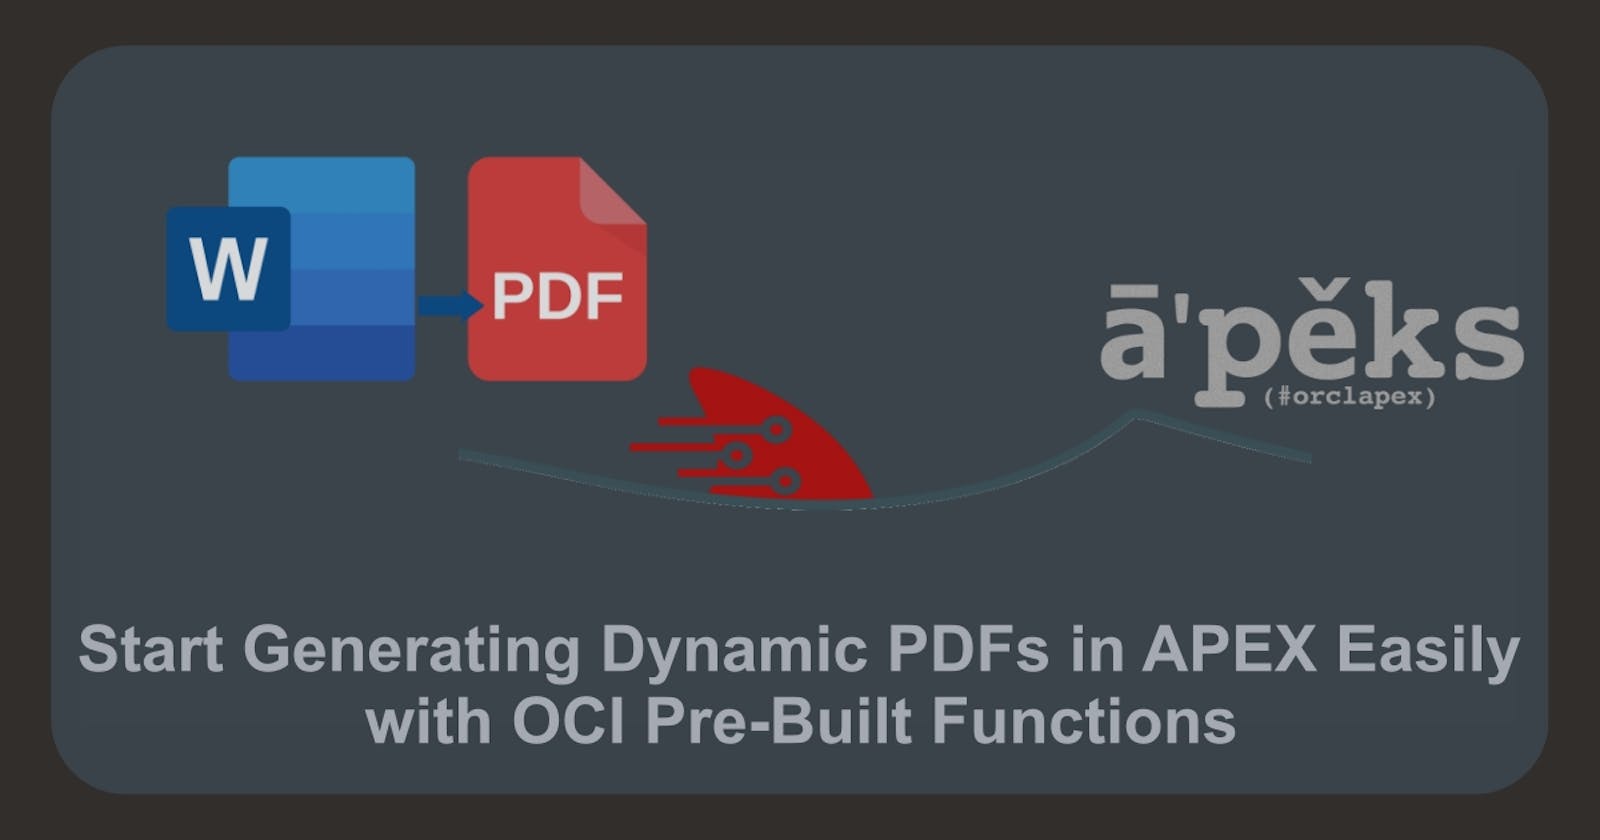 Start Generating Dynamic PDFs in APEX Easily with OCI Pre-Built Functions